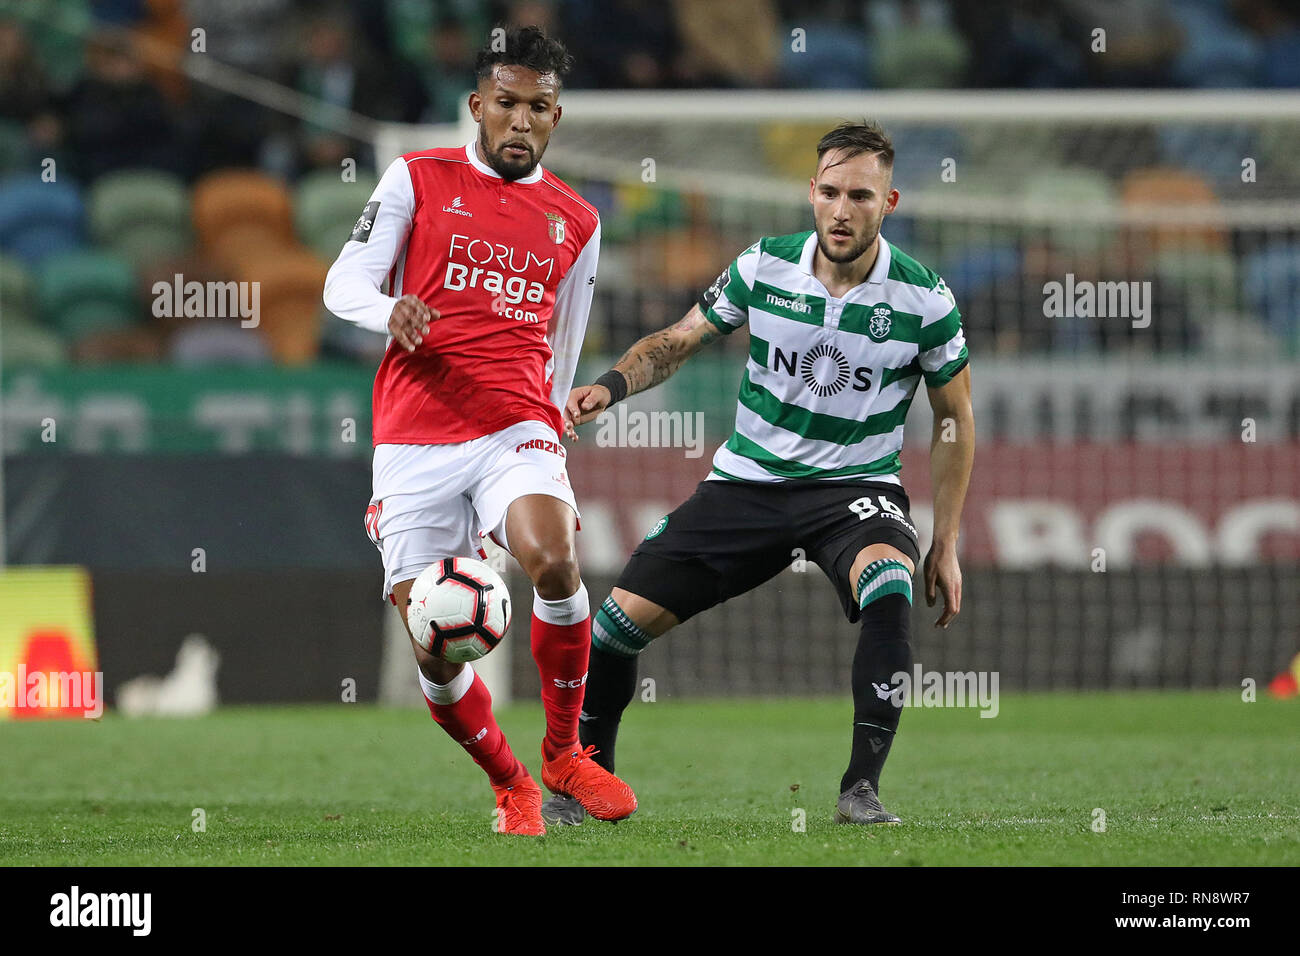 Dyego Sousa of SC Braga (L) vies for the ball with Nemanja Gudelj of Sporting CP (R) during the League NOS 2018/19 footballl match between Sporting CP vs SC Braga.  (Final score: Sporting CP 3 - 0 SC Braga) Stock Photo